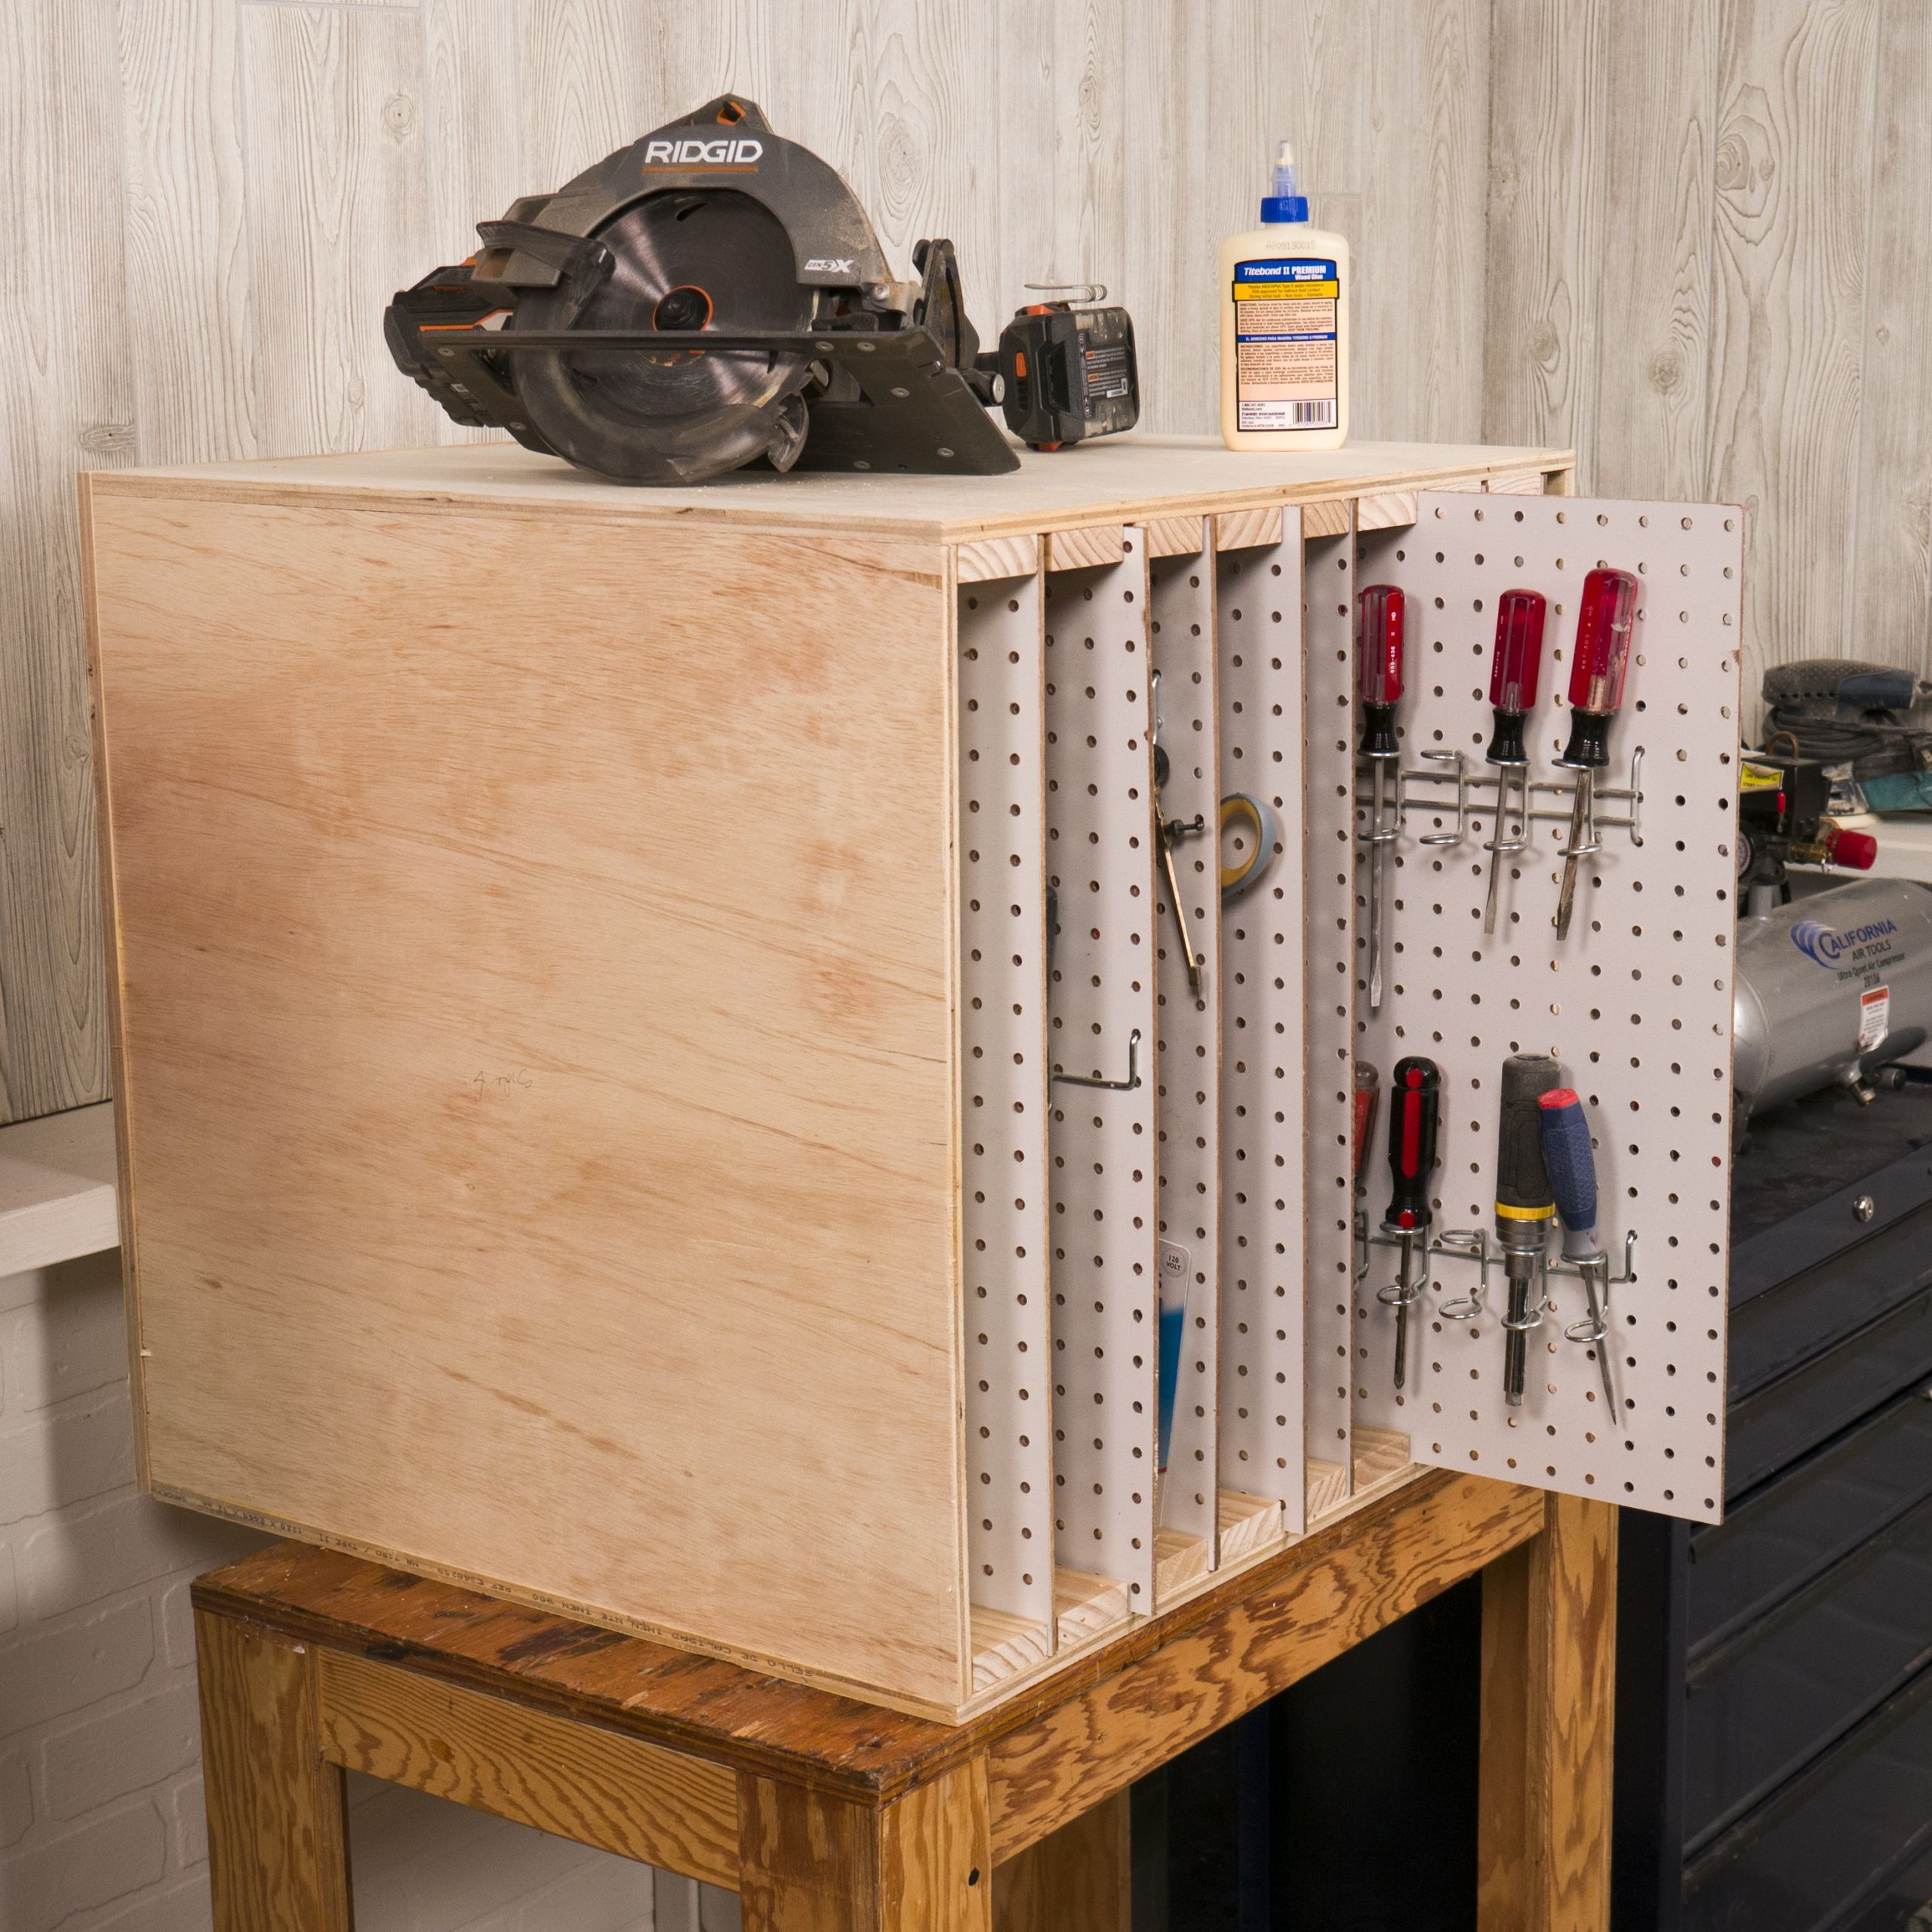 DIY Pegboard Tool Organizer
 How To Build a Sliding Pegboard Storage System